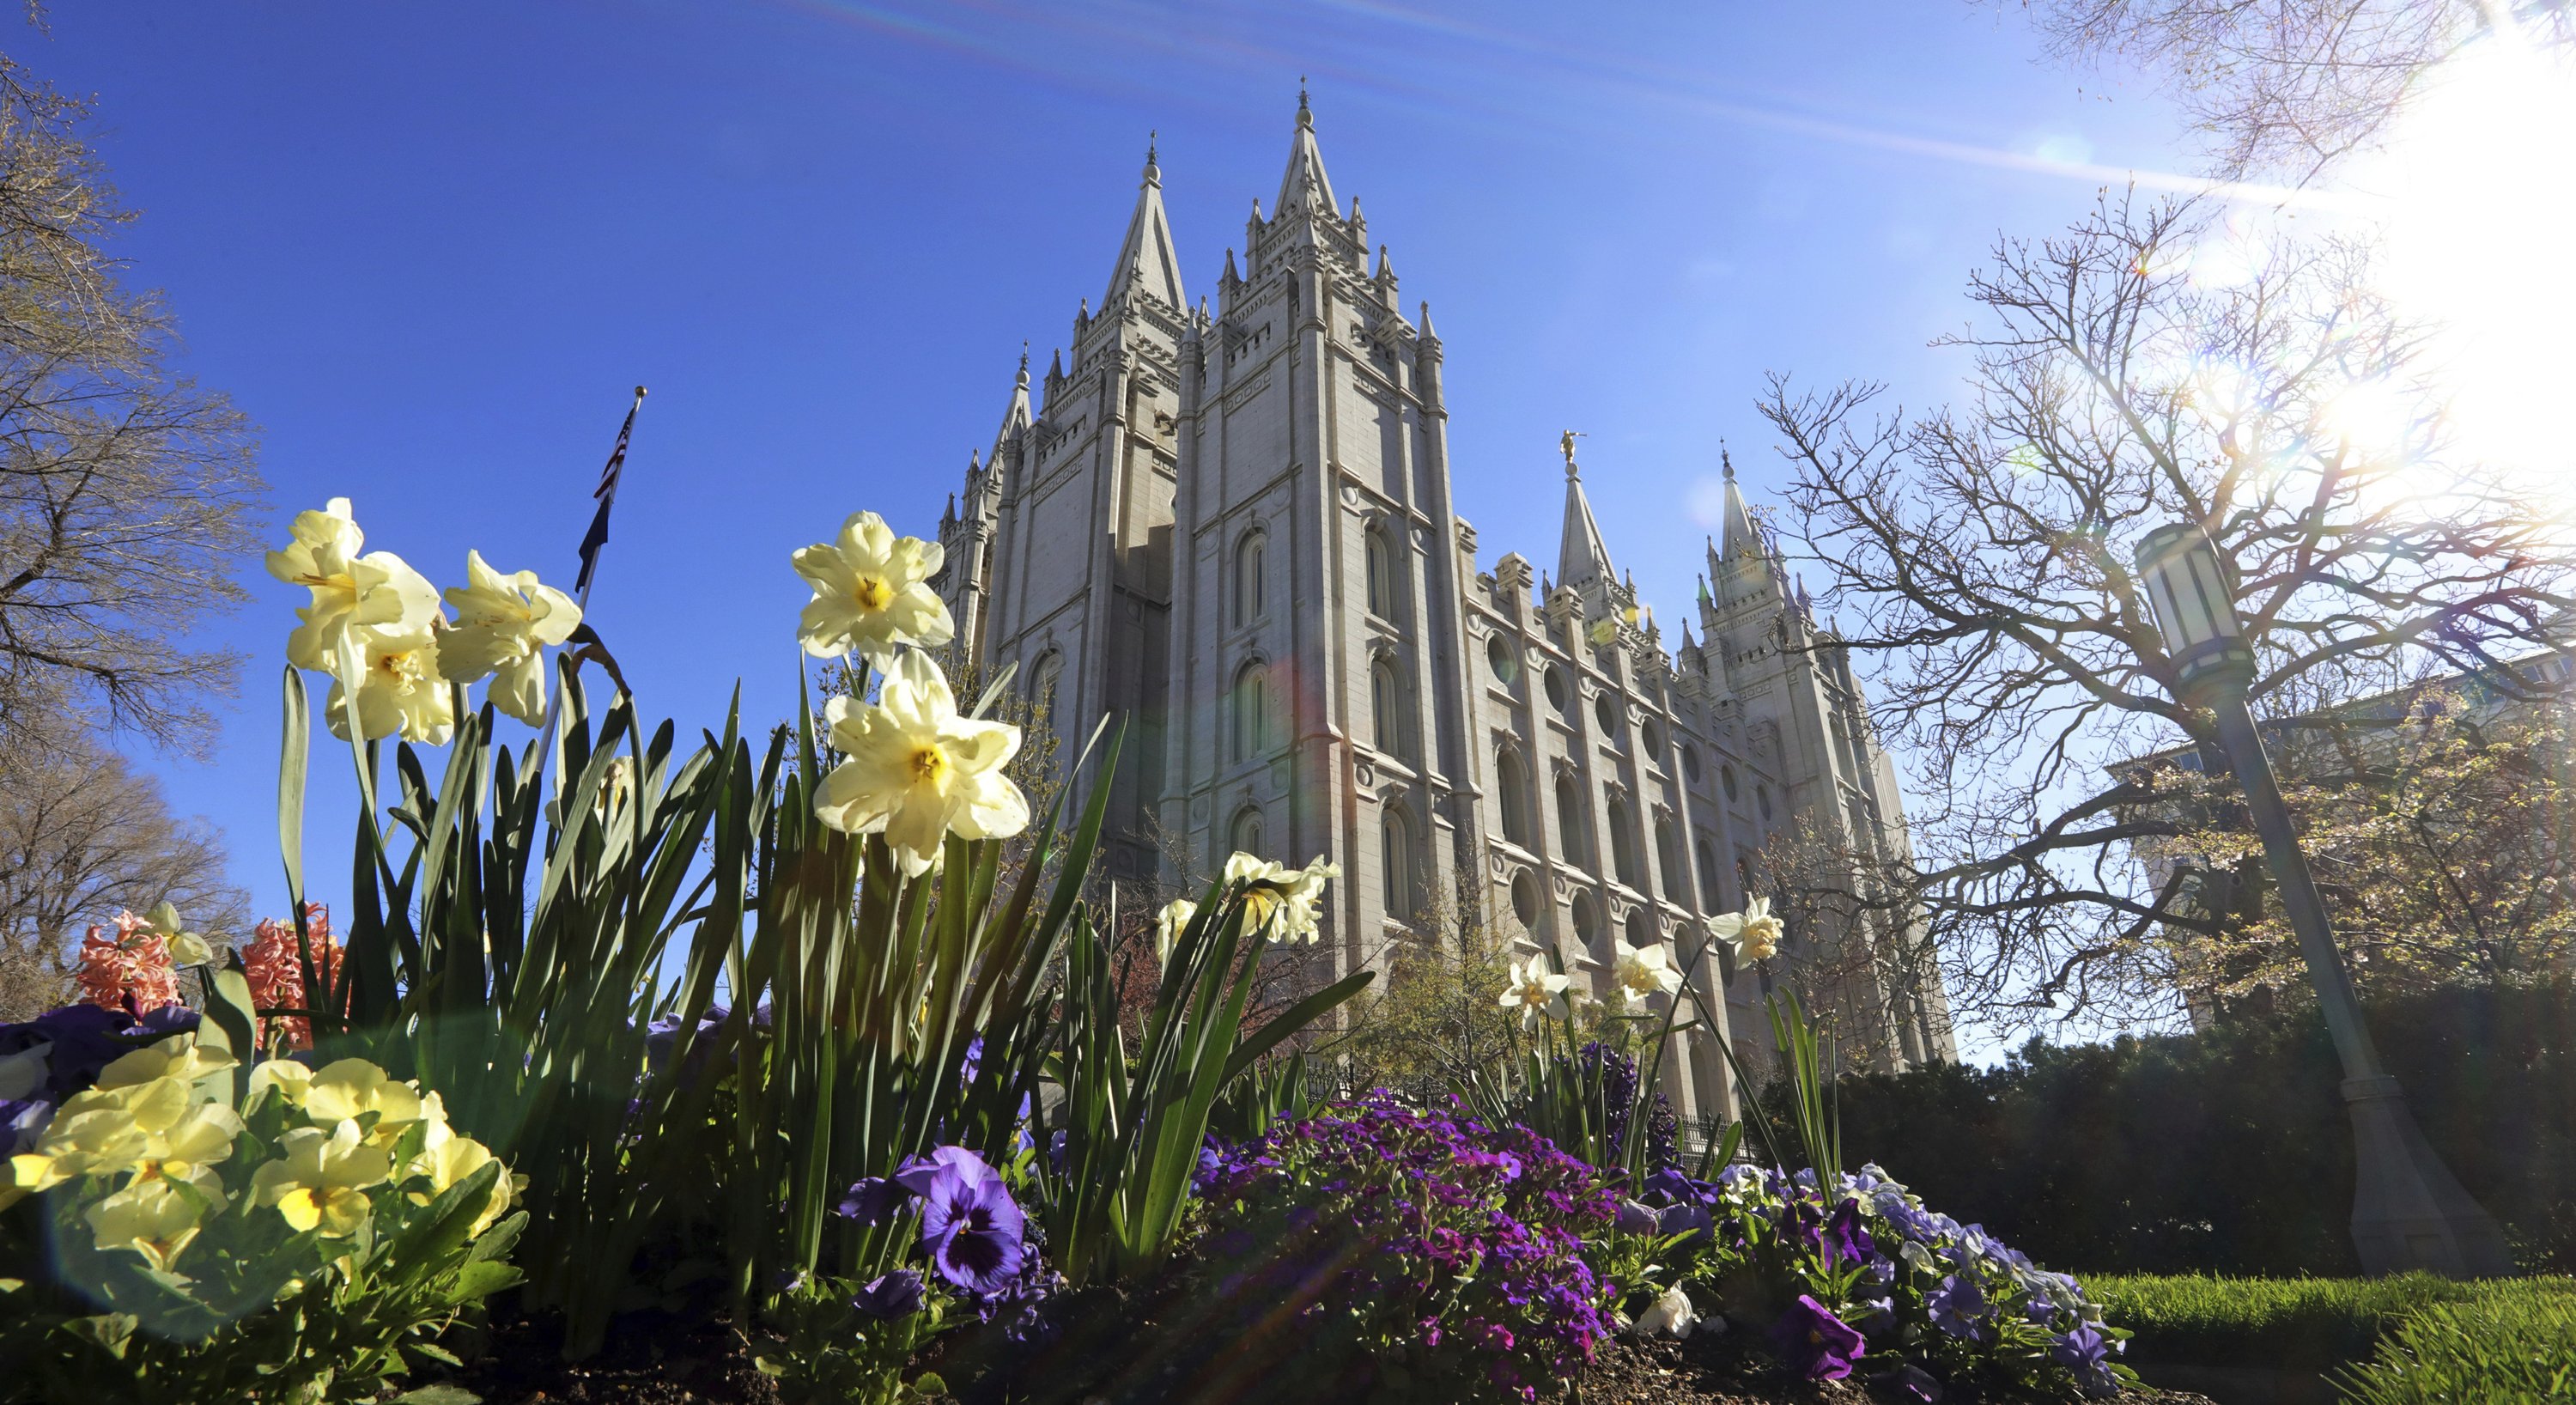 Iconic Salt Lake Temple Closing For Major 4 Year Renovation